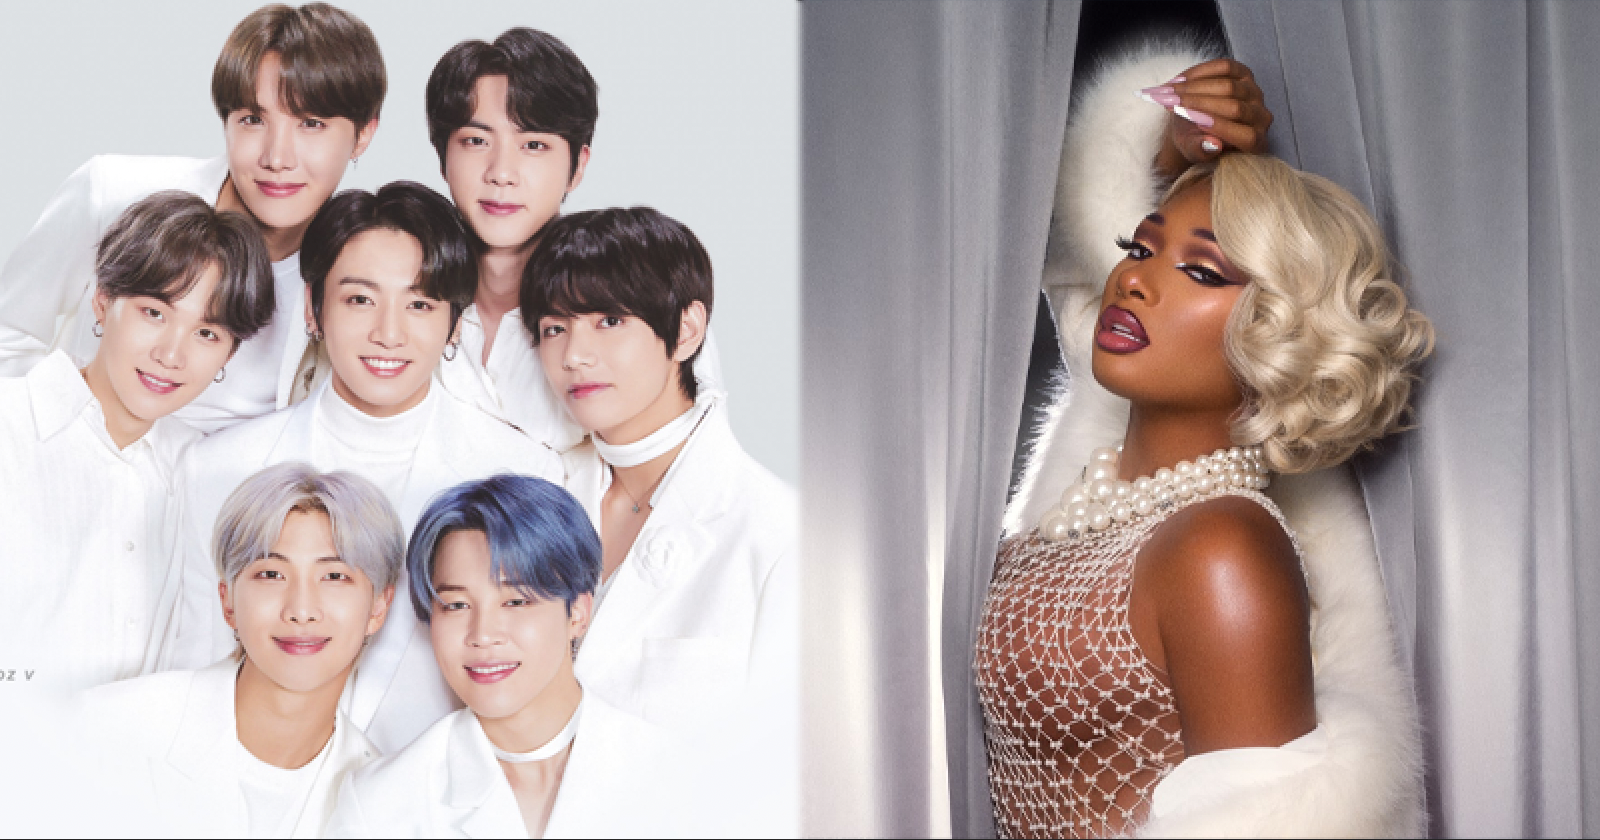 Megan Thee Stallion Reportedly a Featuring Artist on BTS' 'Butter' Remix